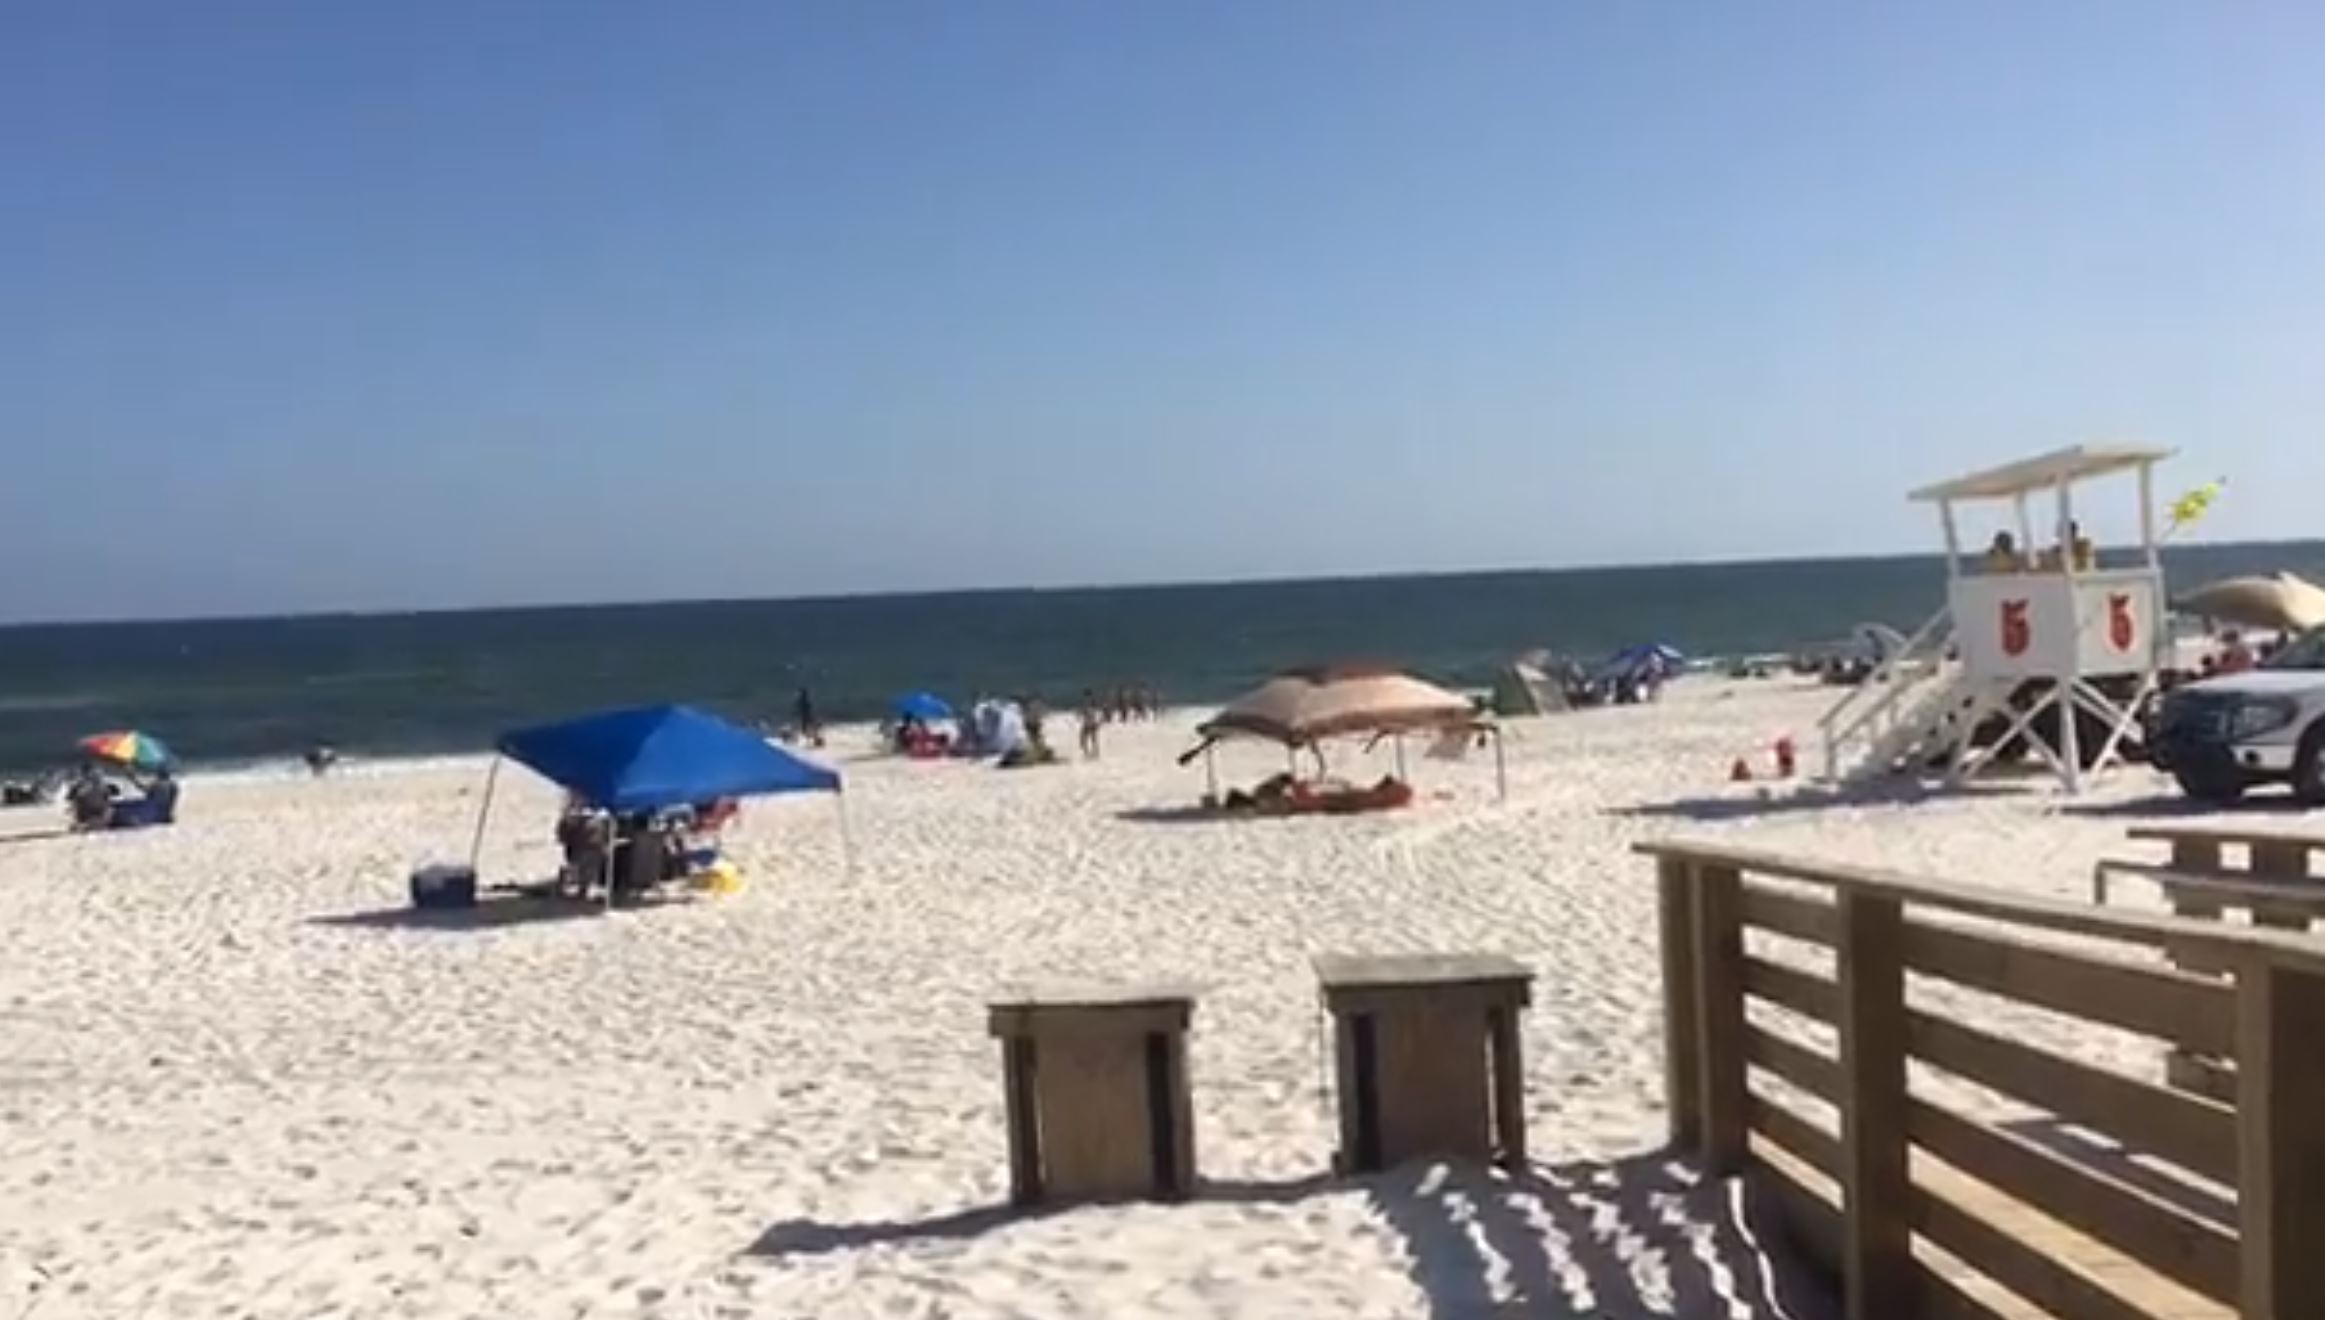 Alabama beaches to reopen Friday, Oct. 2